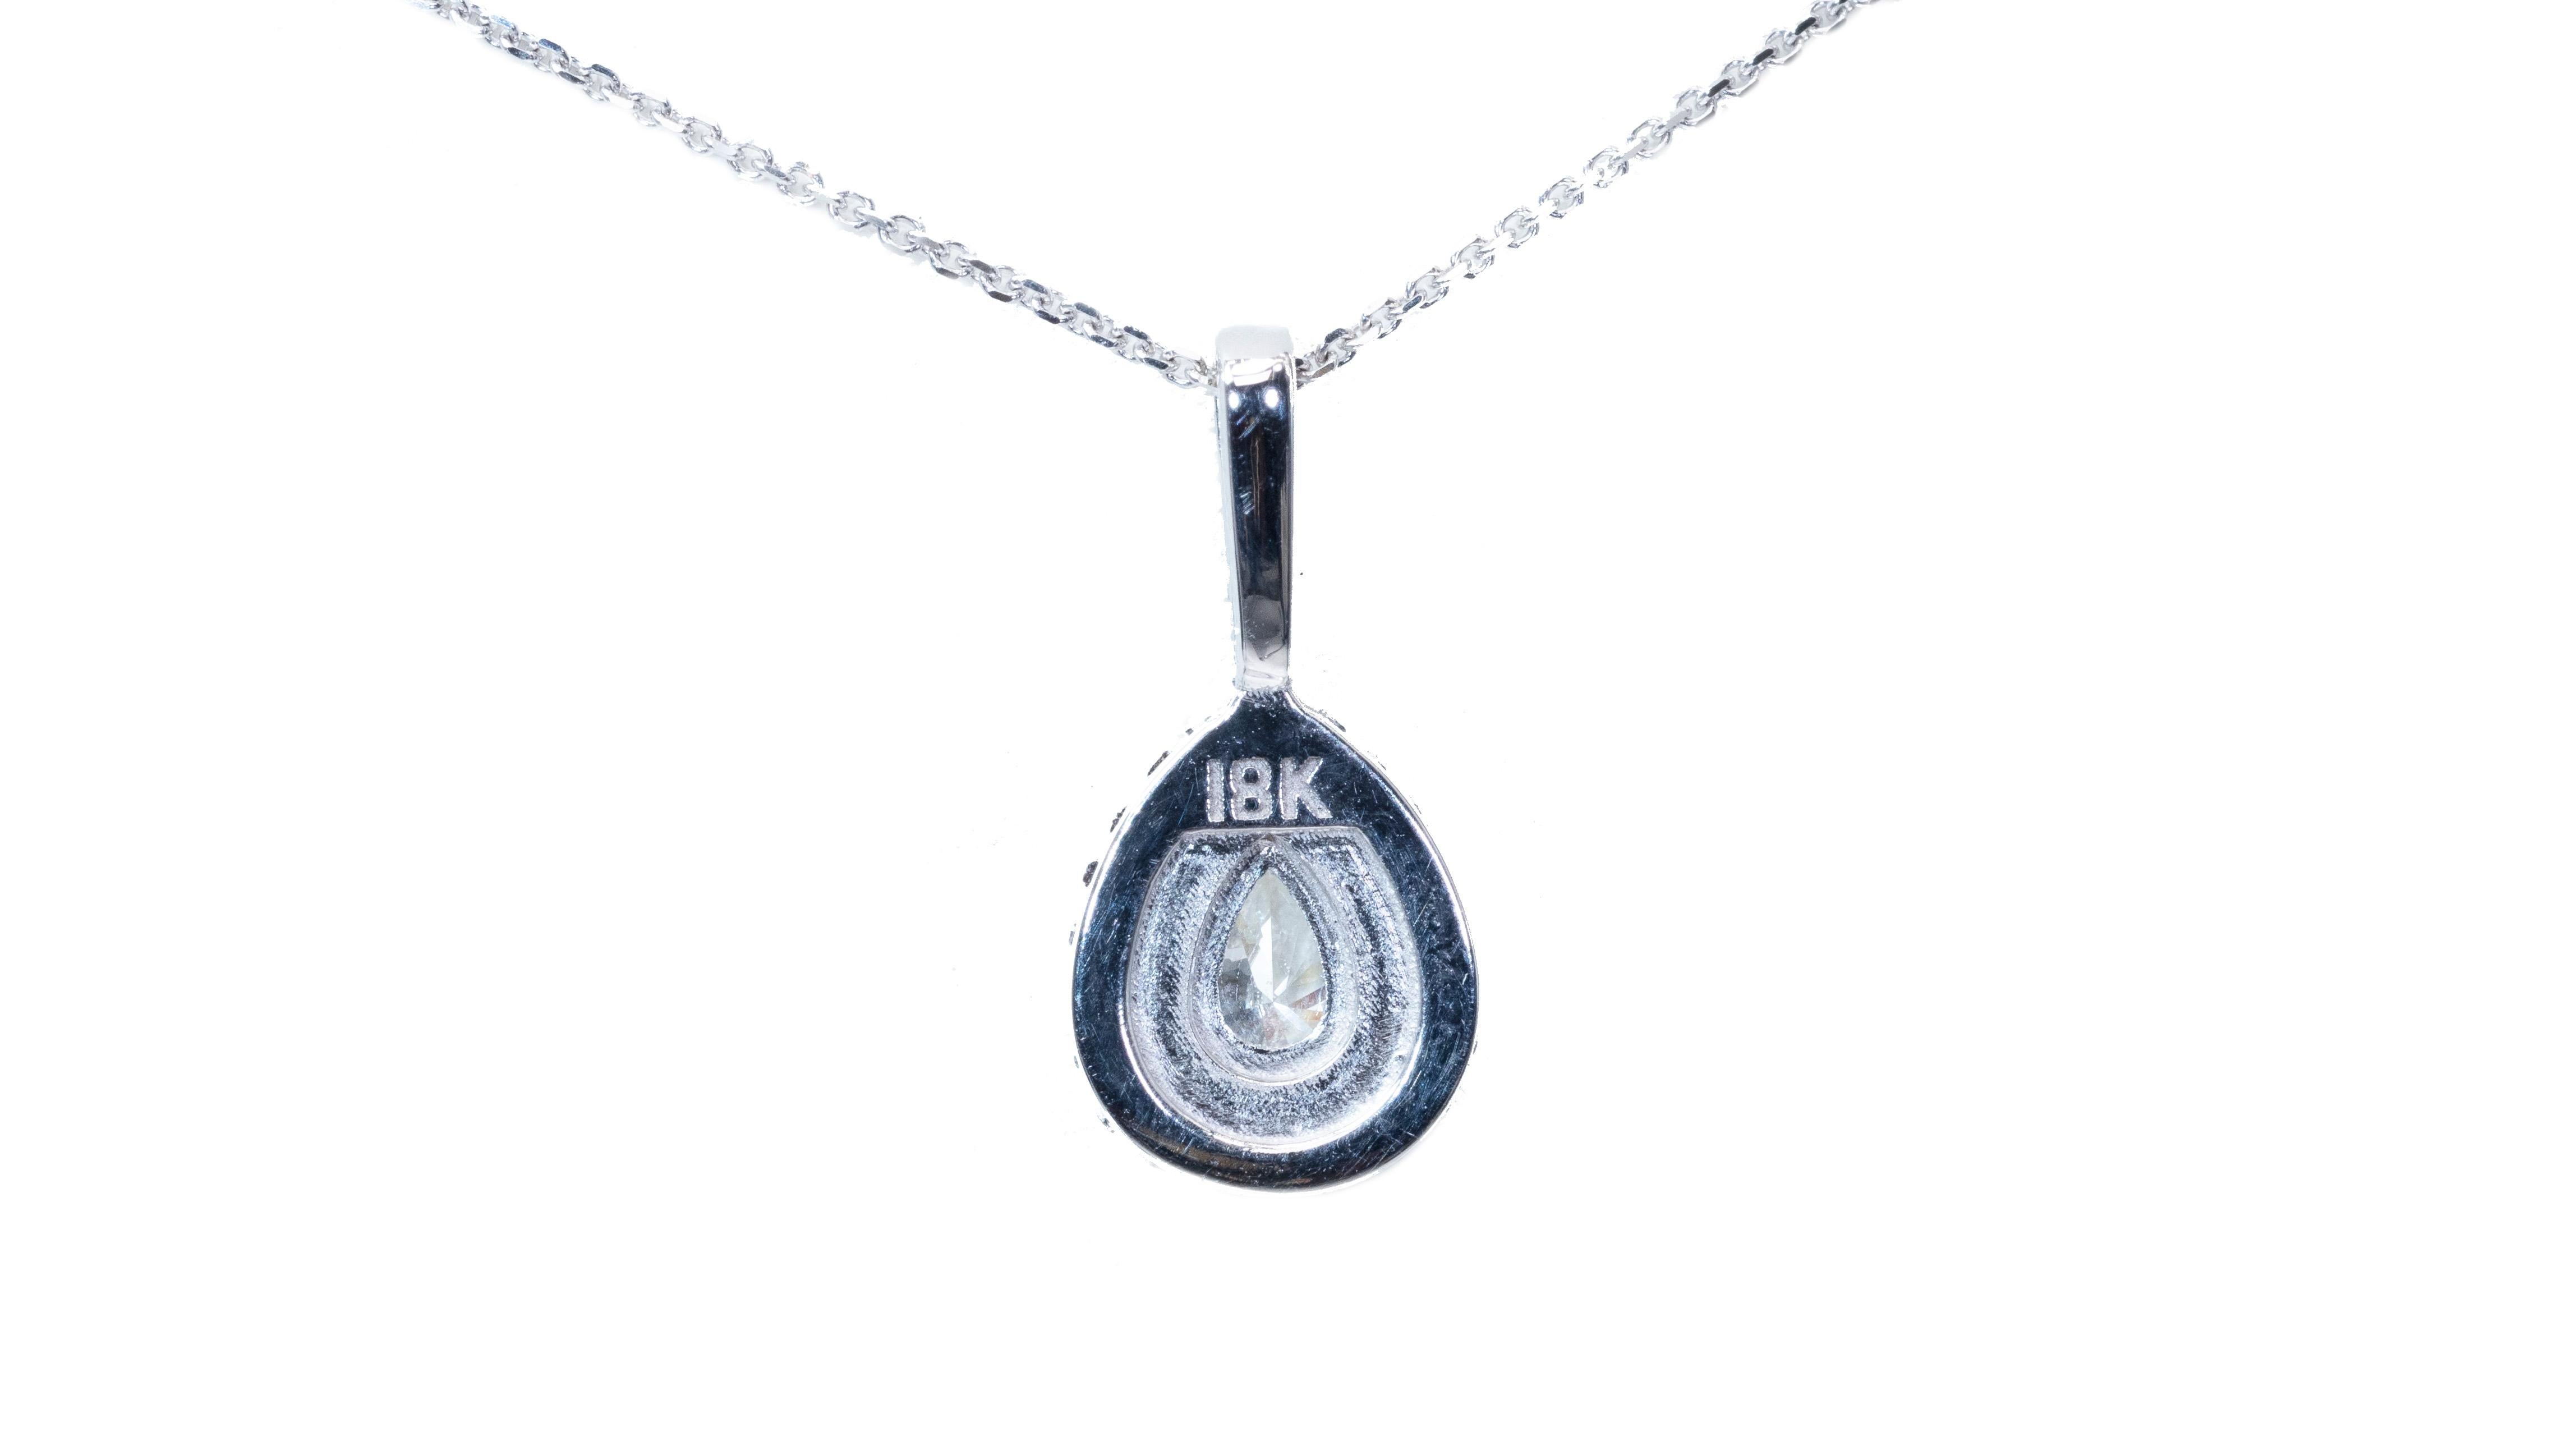 Beautiful double halo pendant with chain made from 18k white gold with 0.45 total carat of pear shape diamond and round brilliant diamonds. This pendant with chain comes with an AIG report and a fancy box.

-1 diamond main stone of 0.24 ct.
cut: